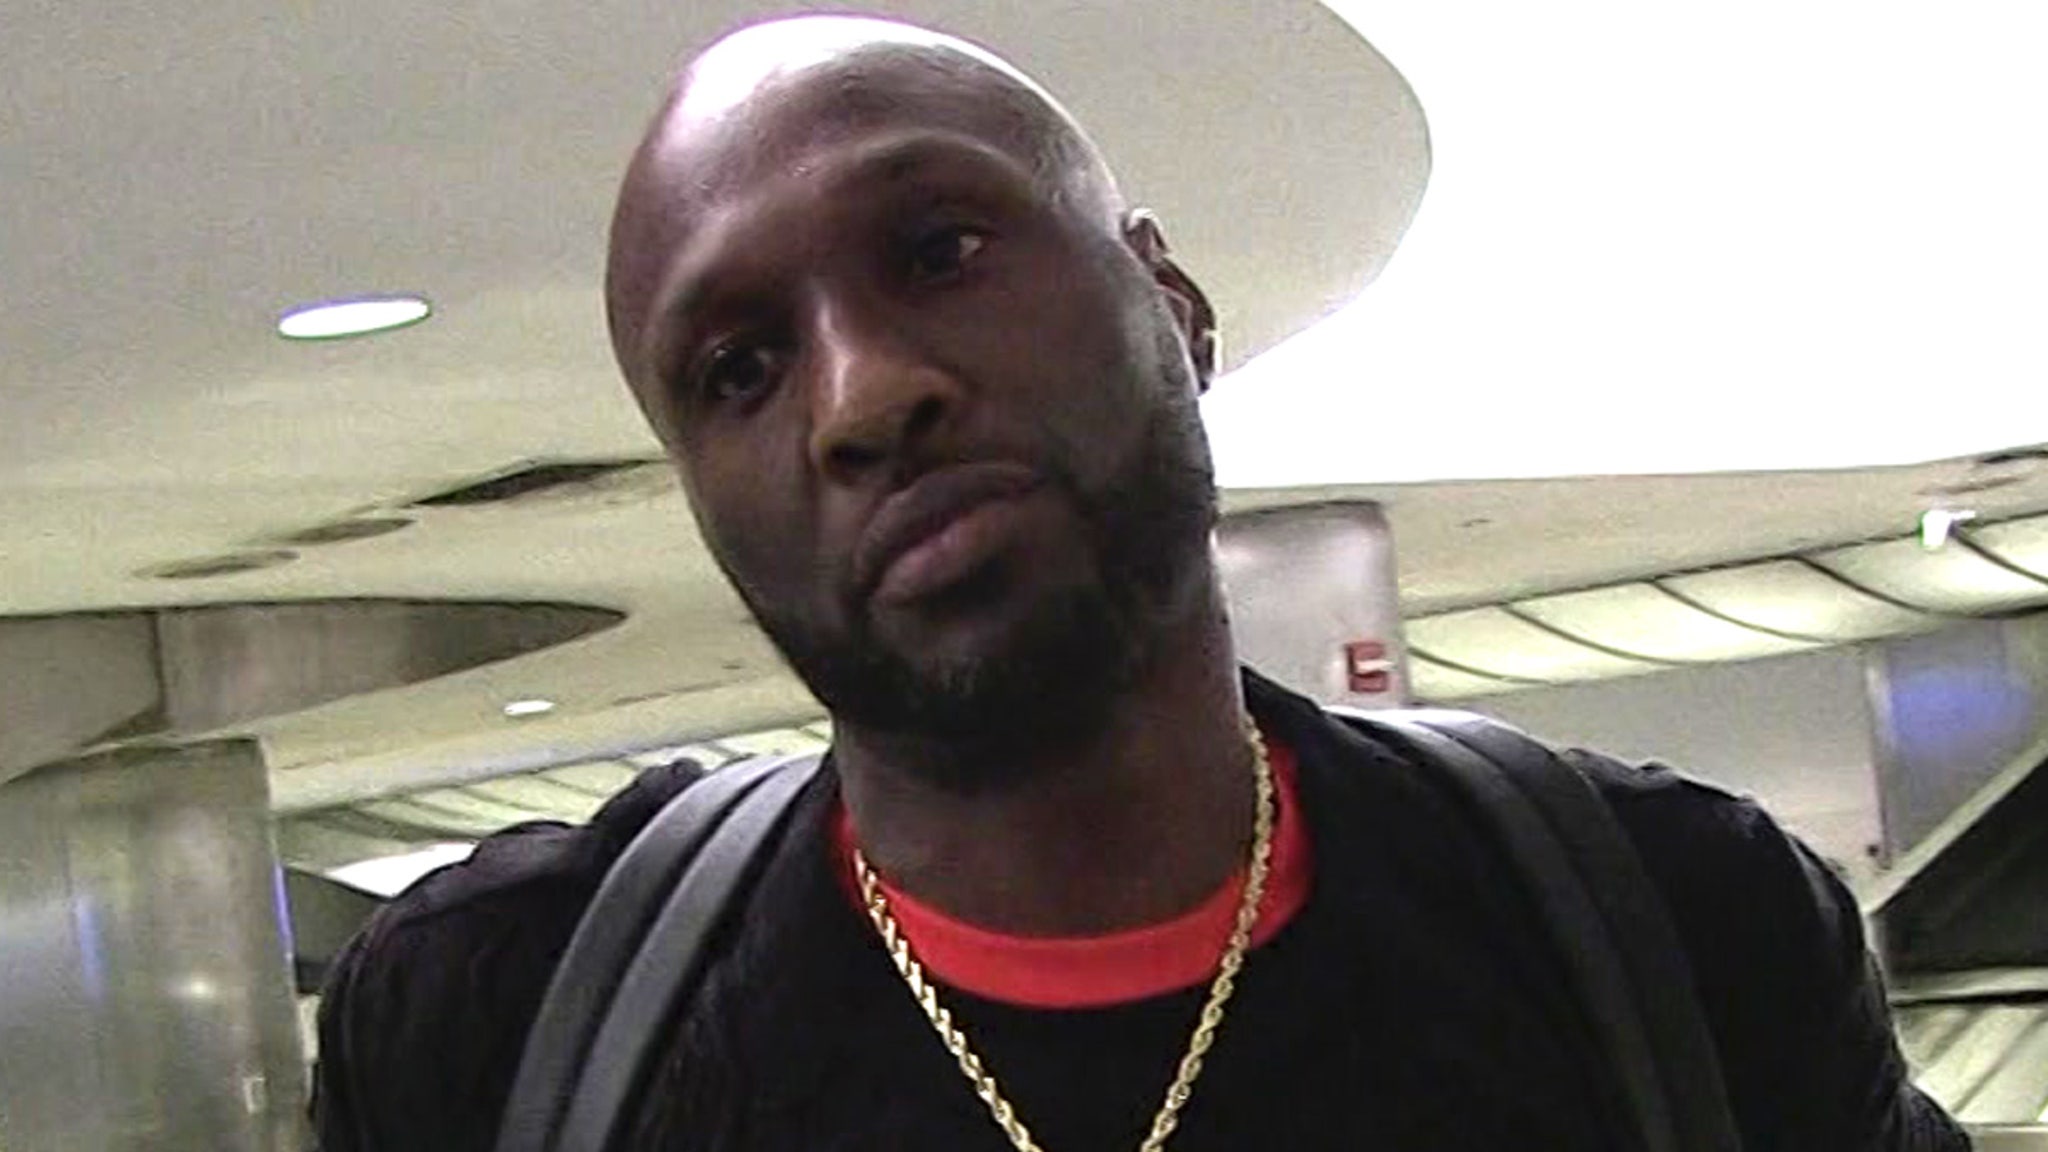 Lamar Odom Ordered To Pay Ex $380K In Support Case